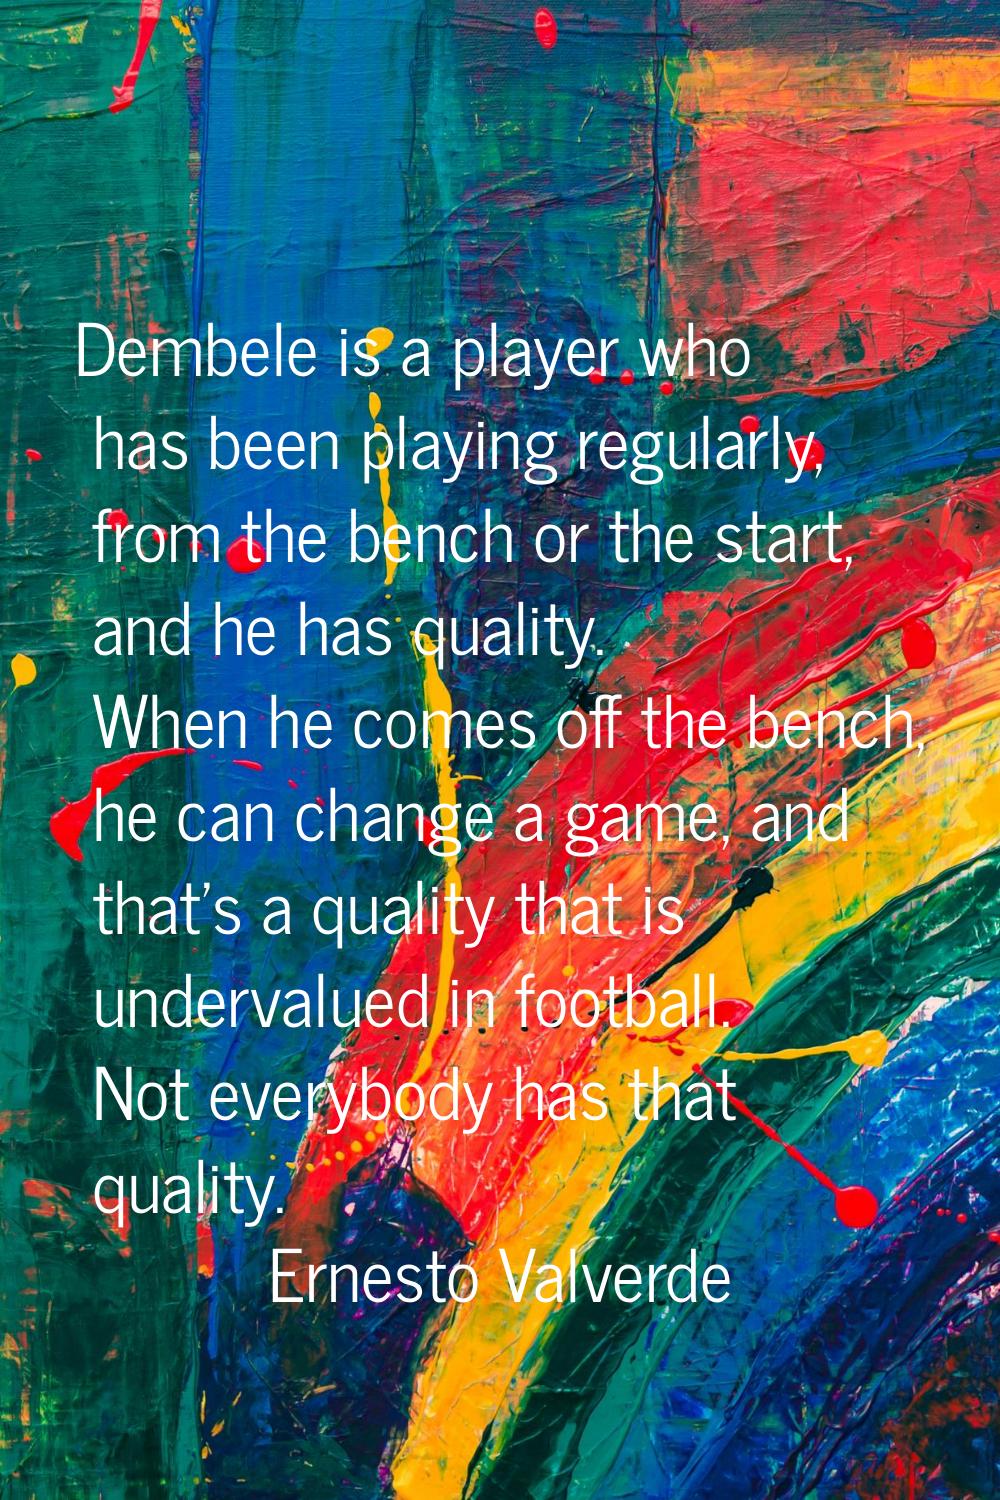 Dembele is a player who has been playing regularly, from the bench or the start, and he has quality